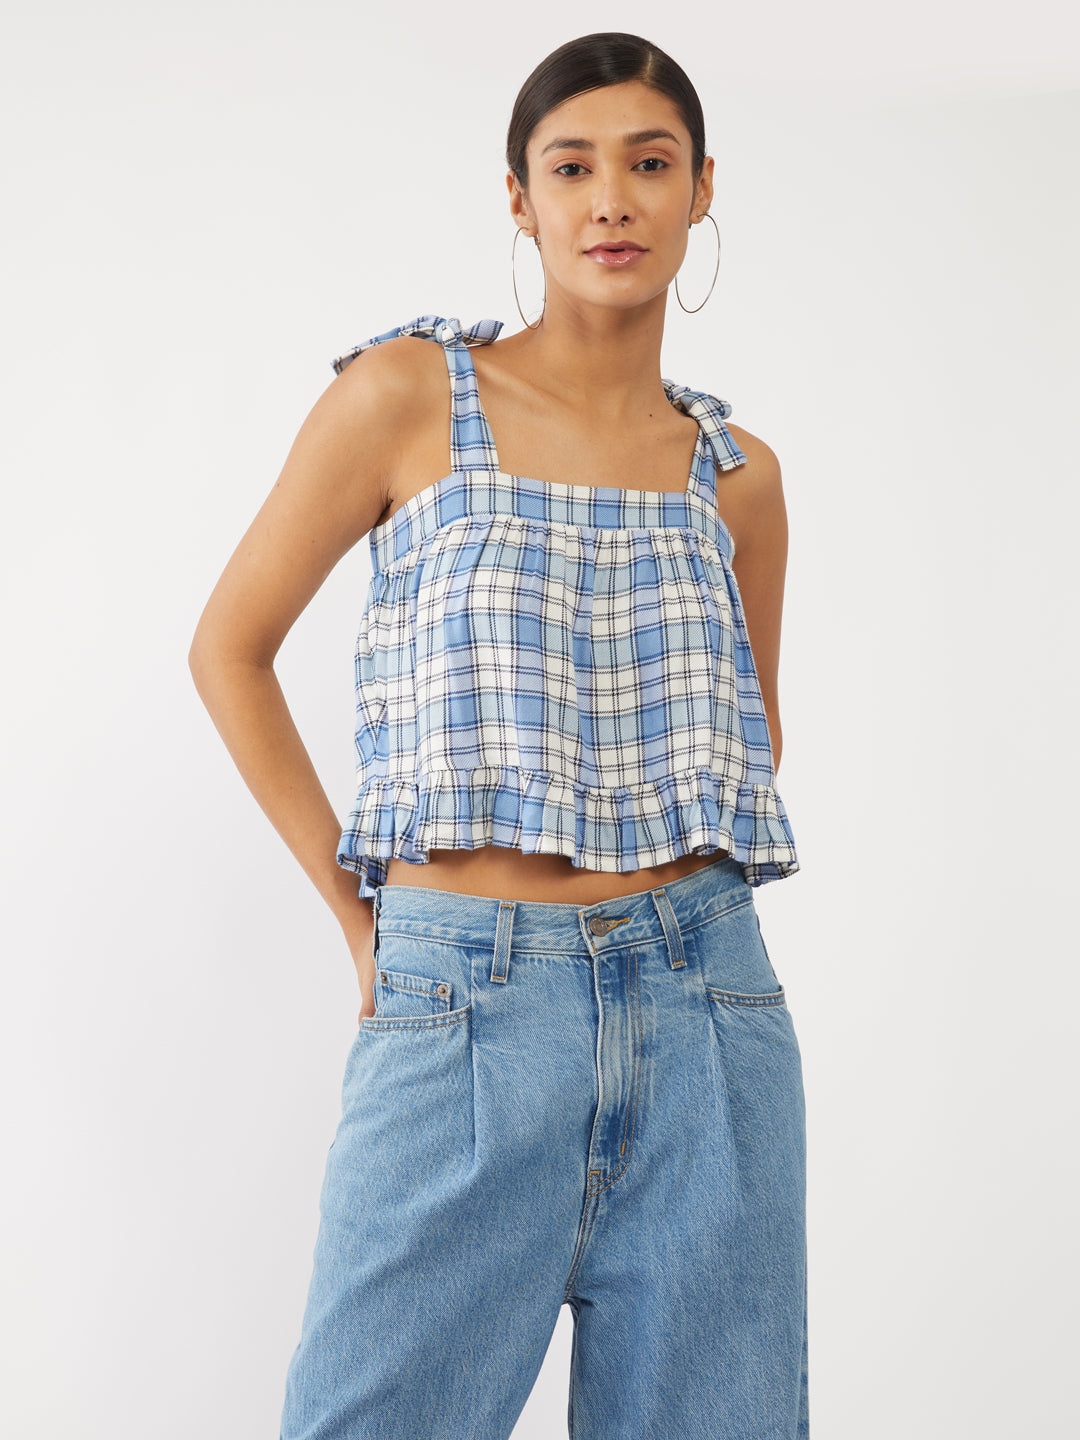 Blue & White Checkered Top for Women